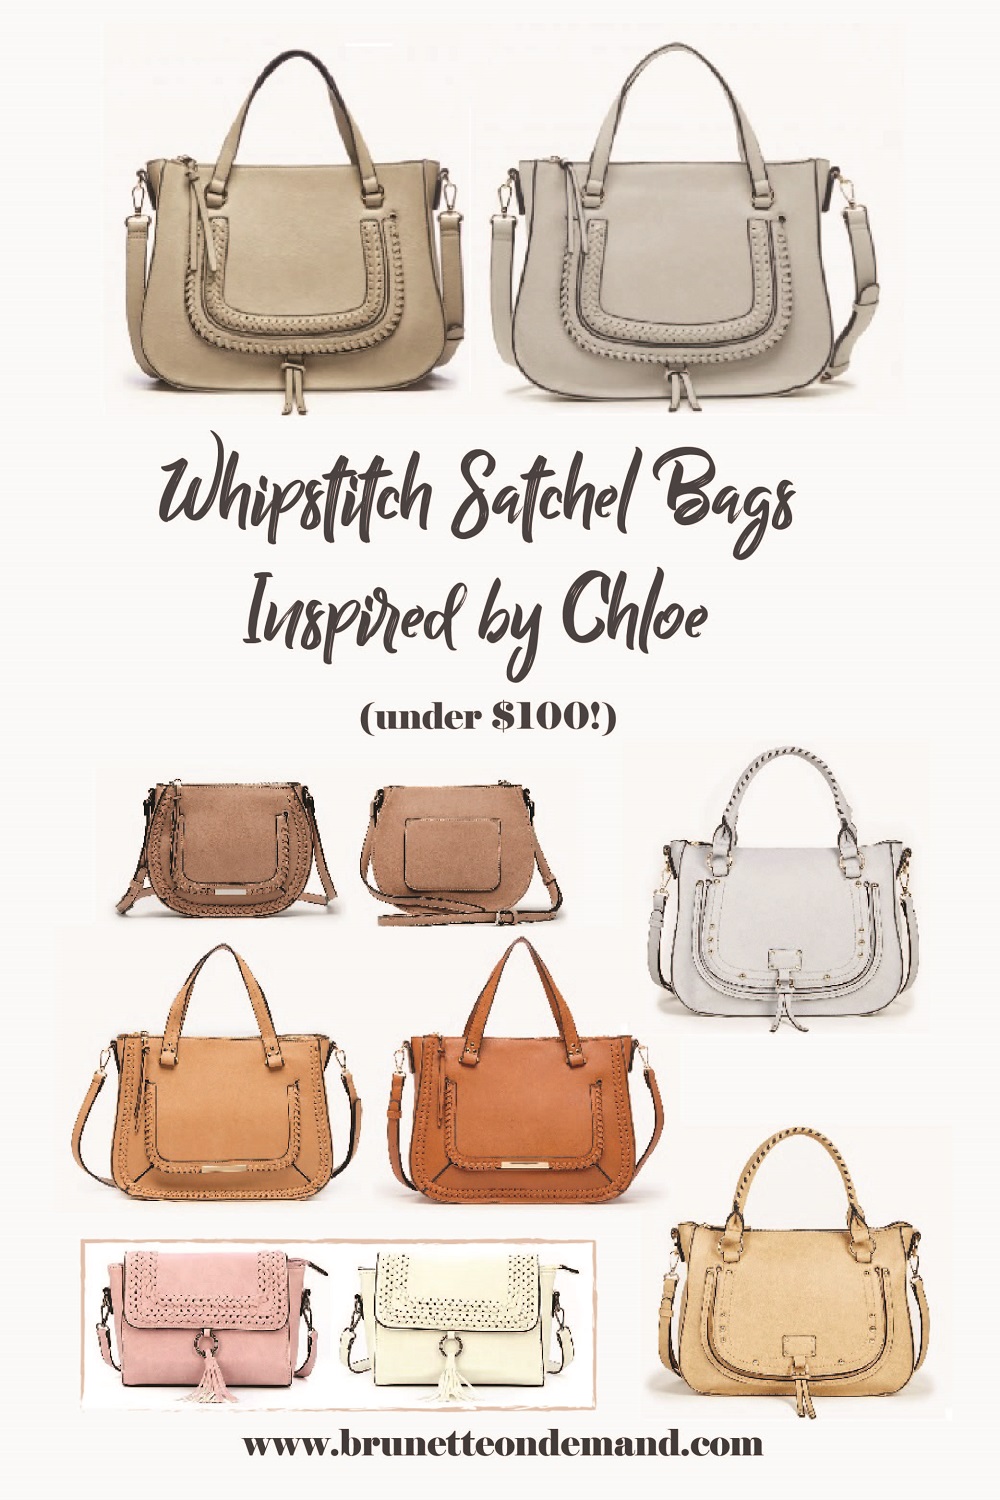 Whipstitch Satchel Bags inspired by Chloe